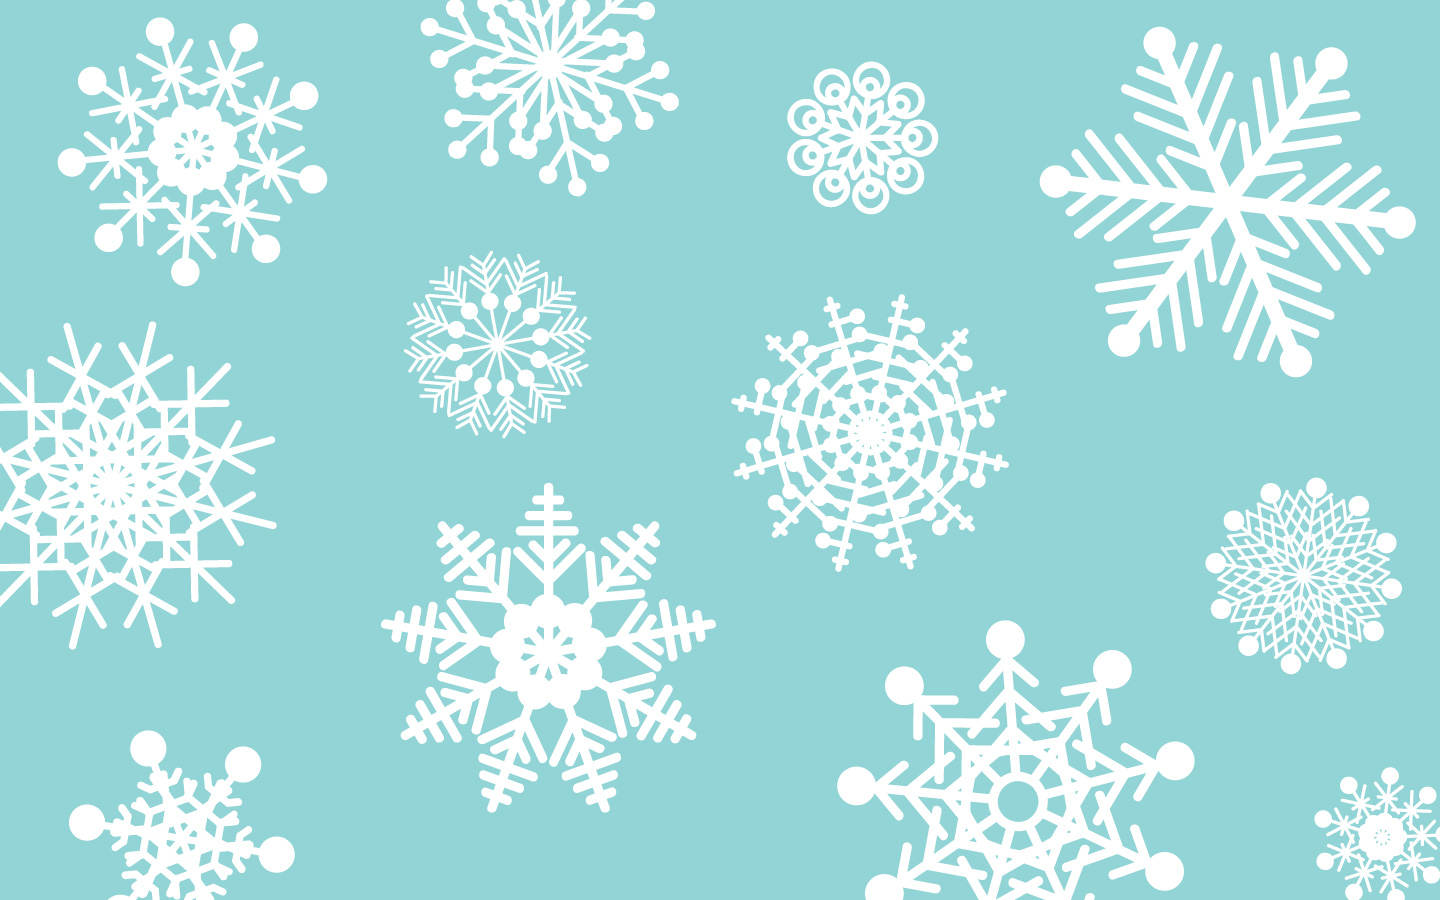 You Can Still The Snowflakes Desktop Wallpaper Here